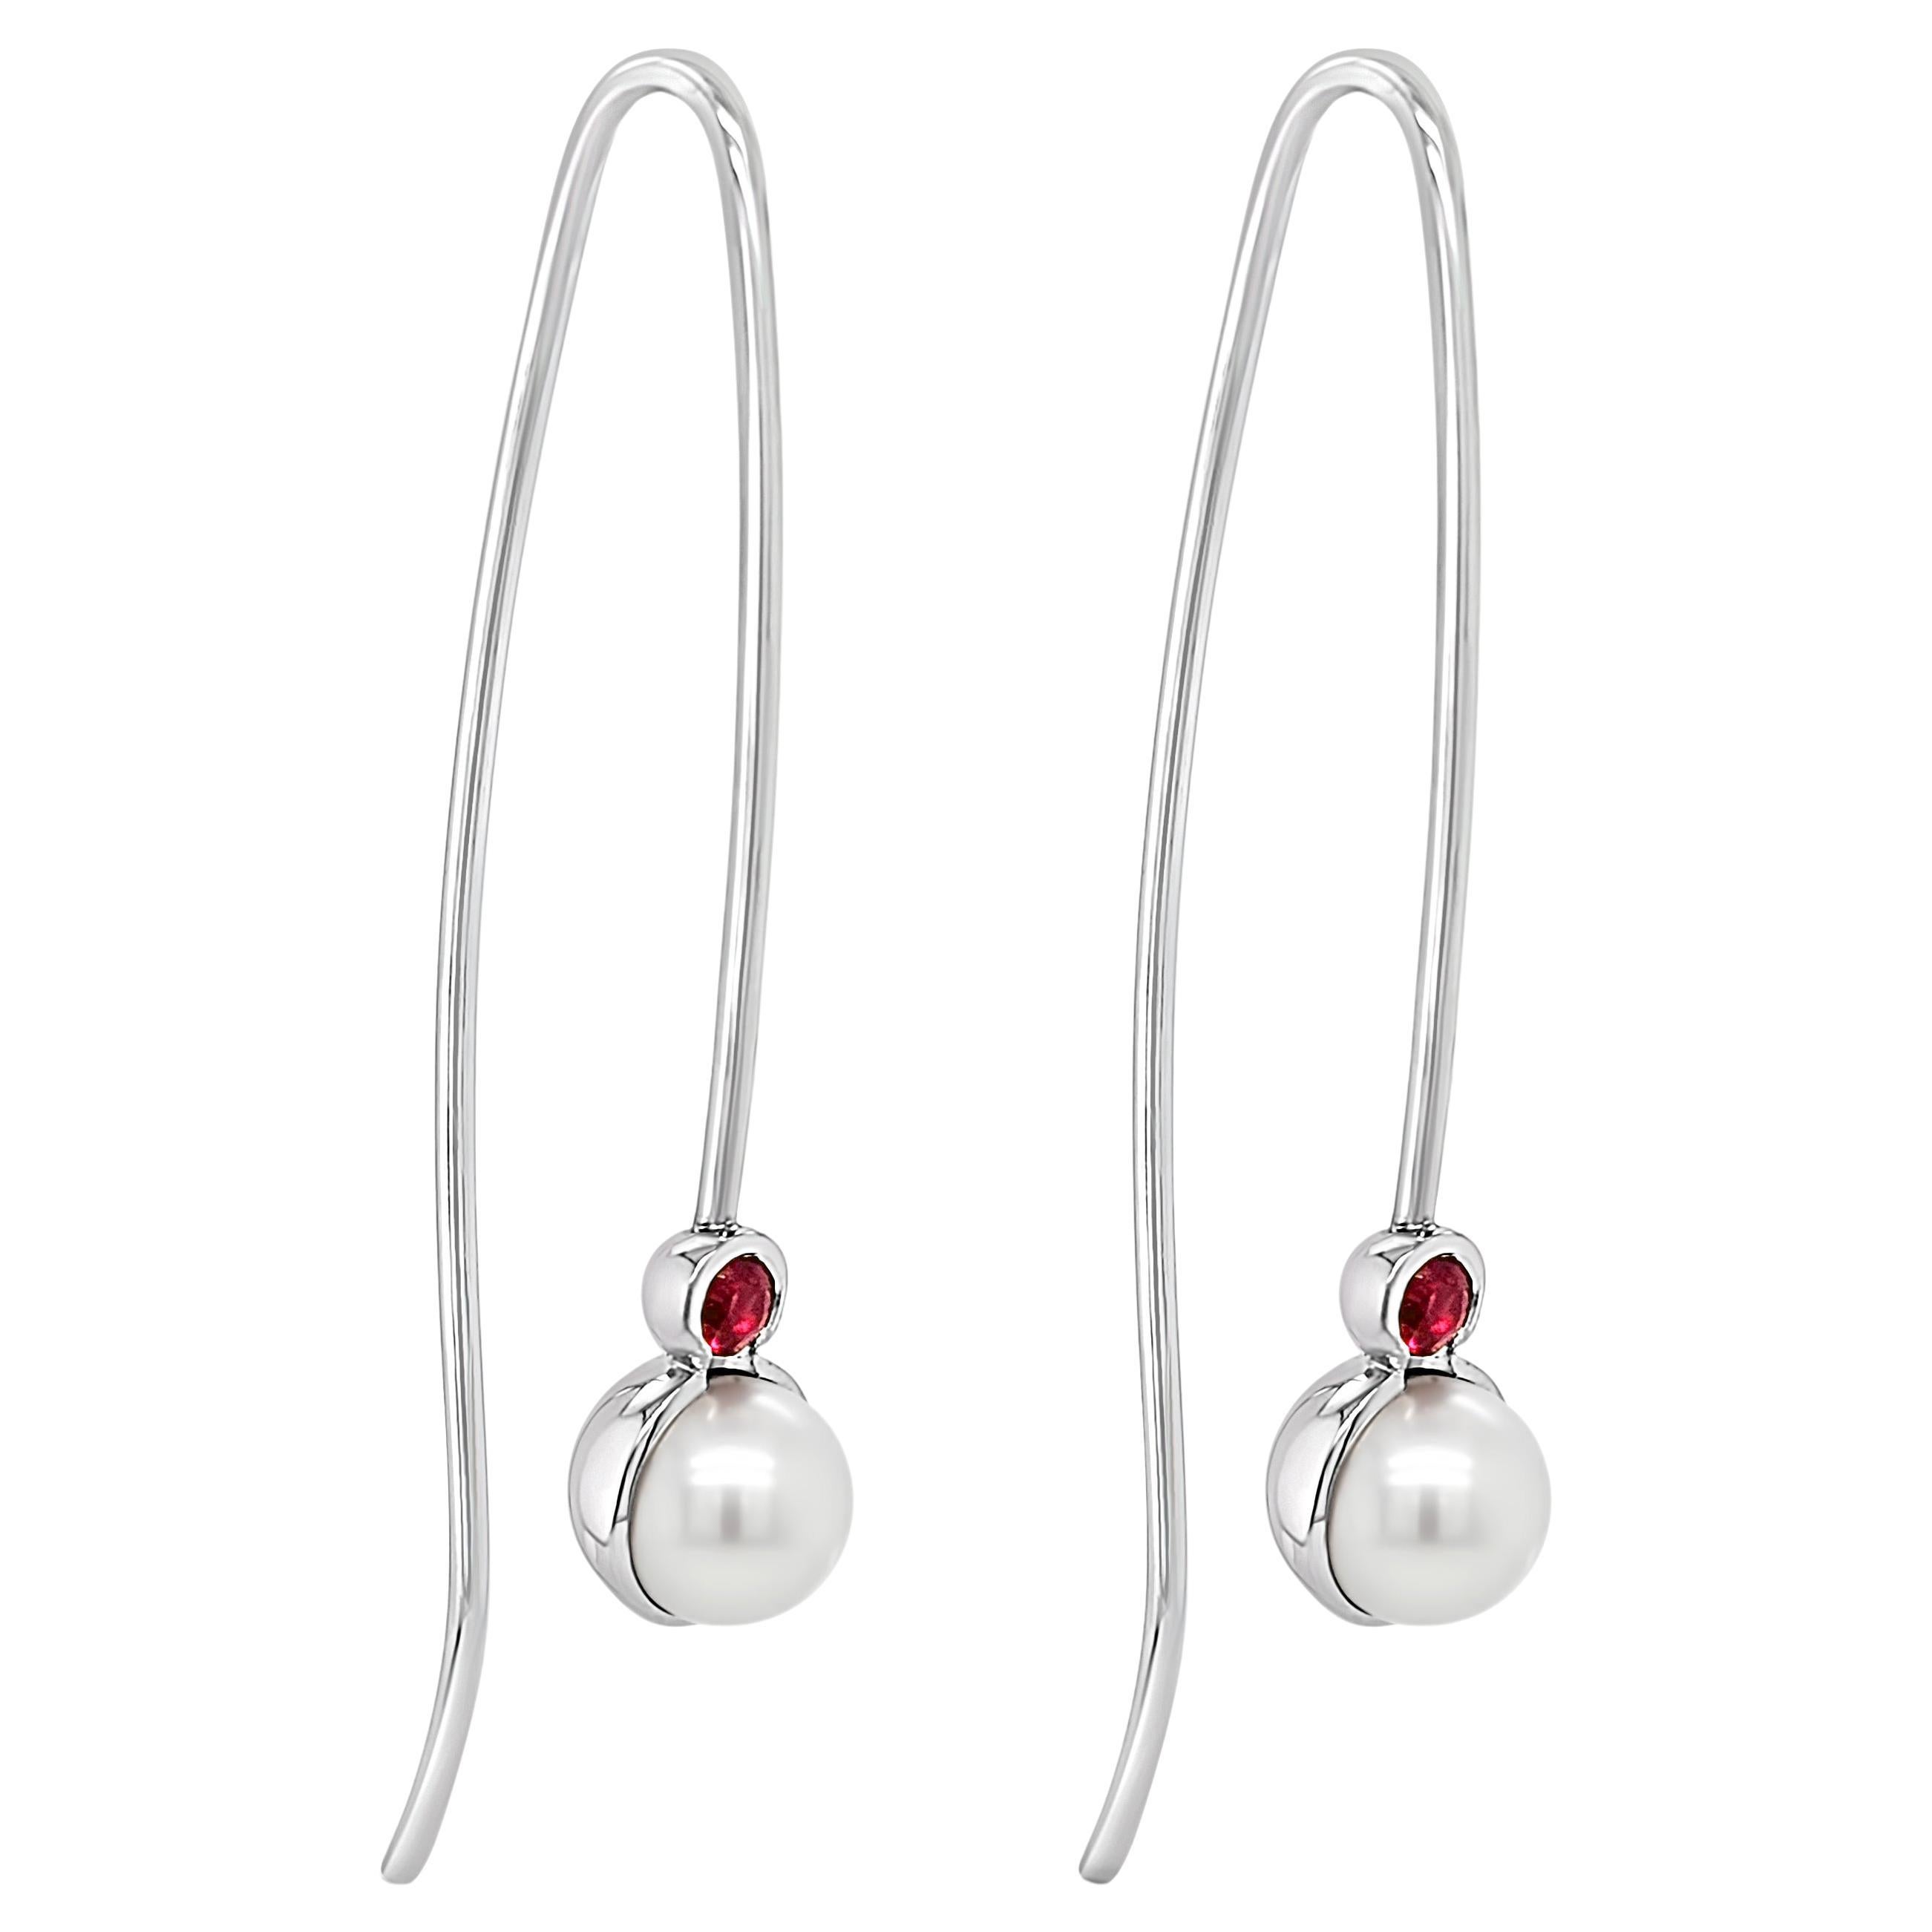  18ct White Gold & Pearl Earrings Featuring Rubies "Estelle" For Sale